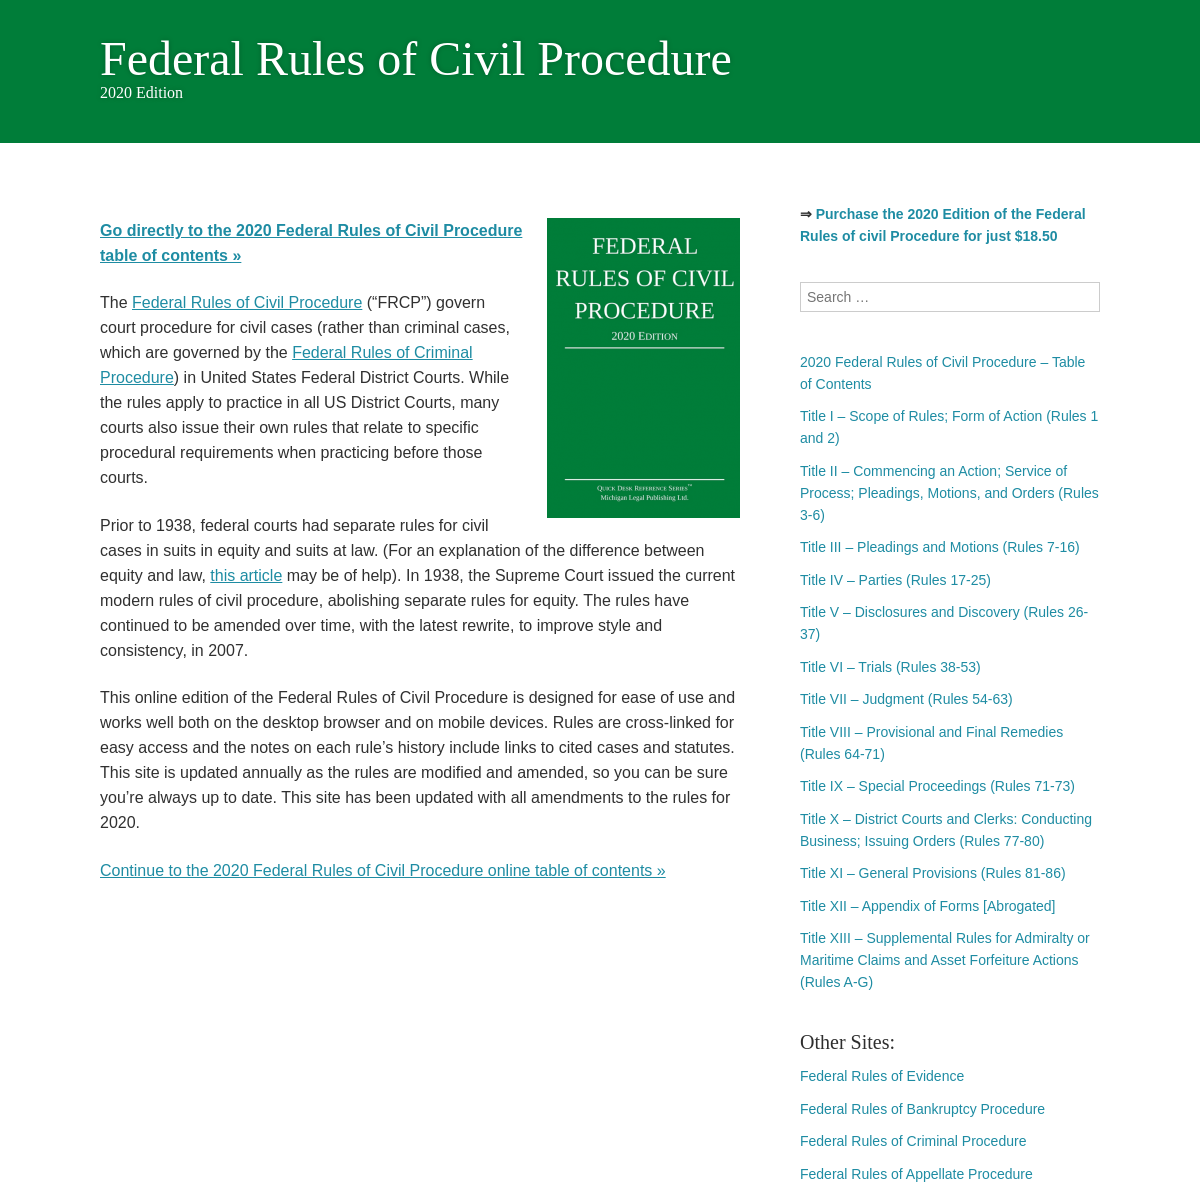 A complete backup of federalrulesofcivilprocedure.org